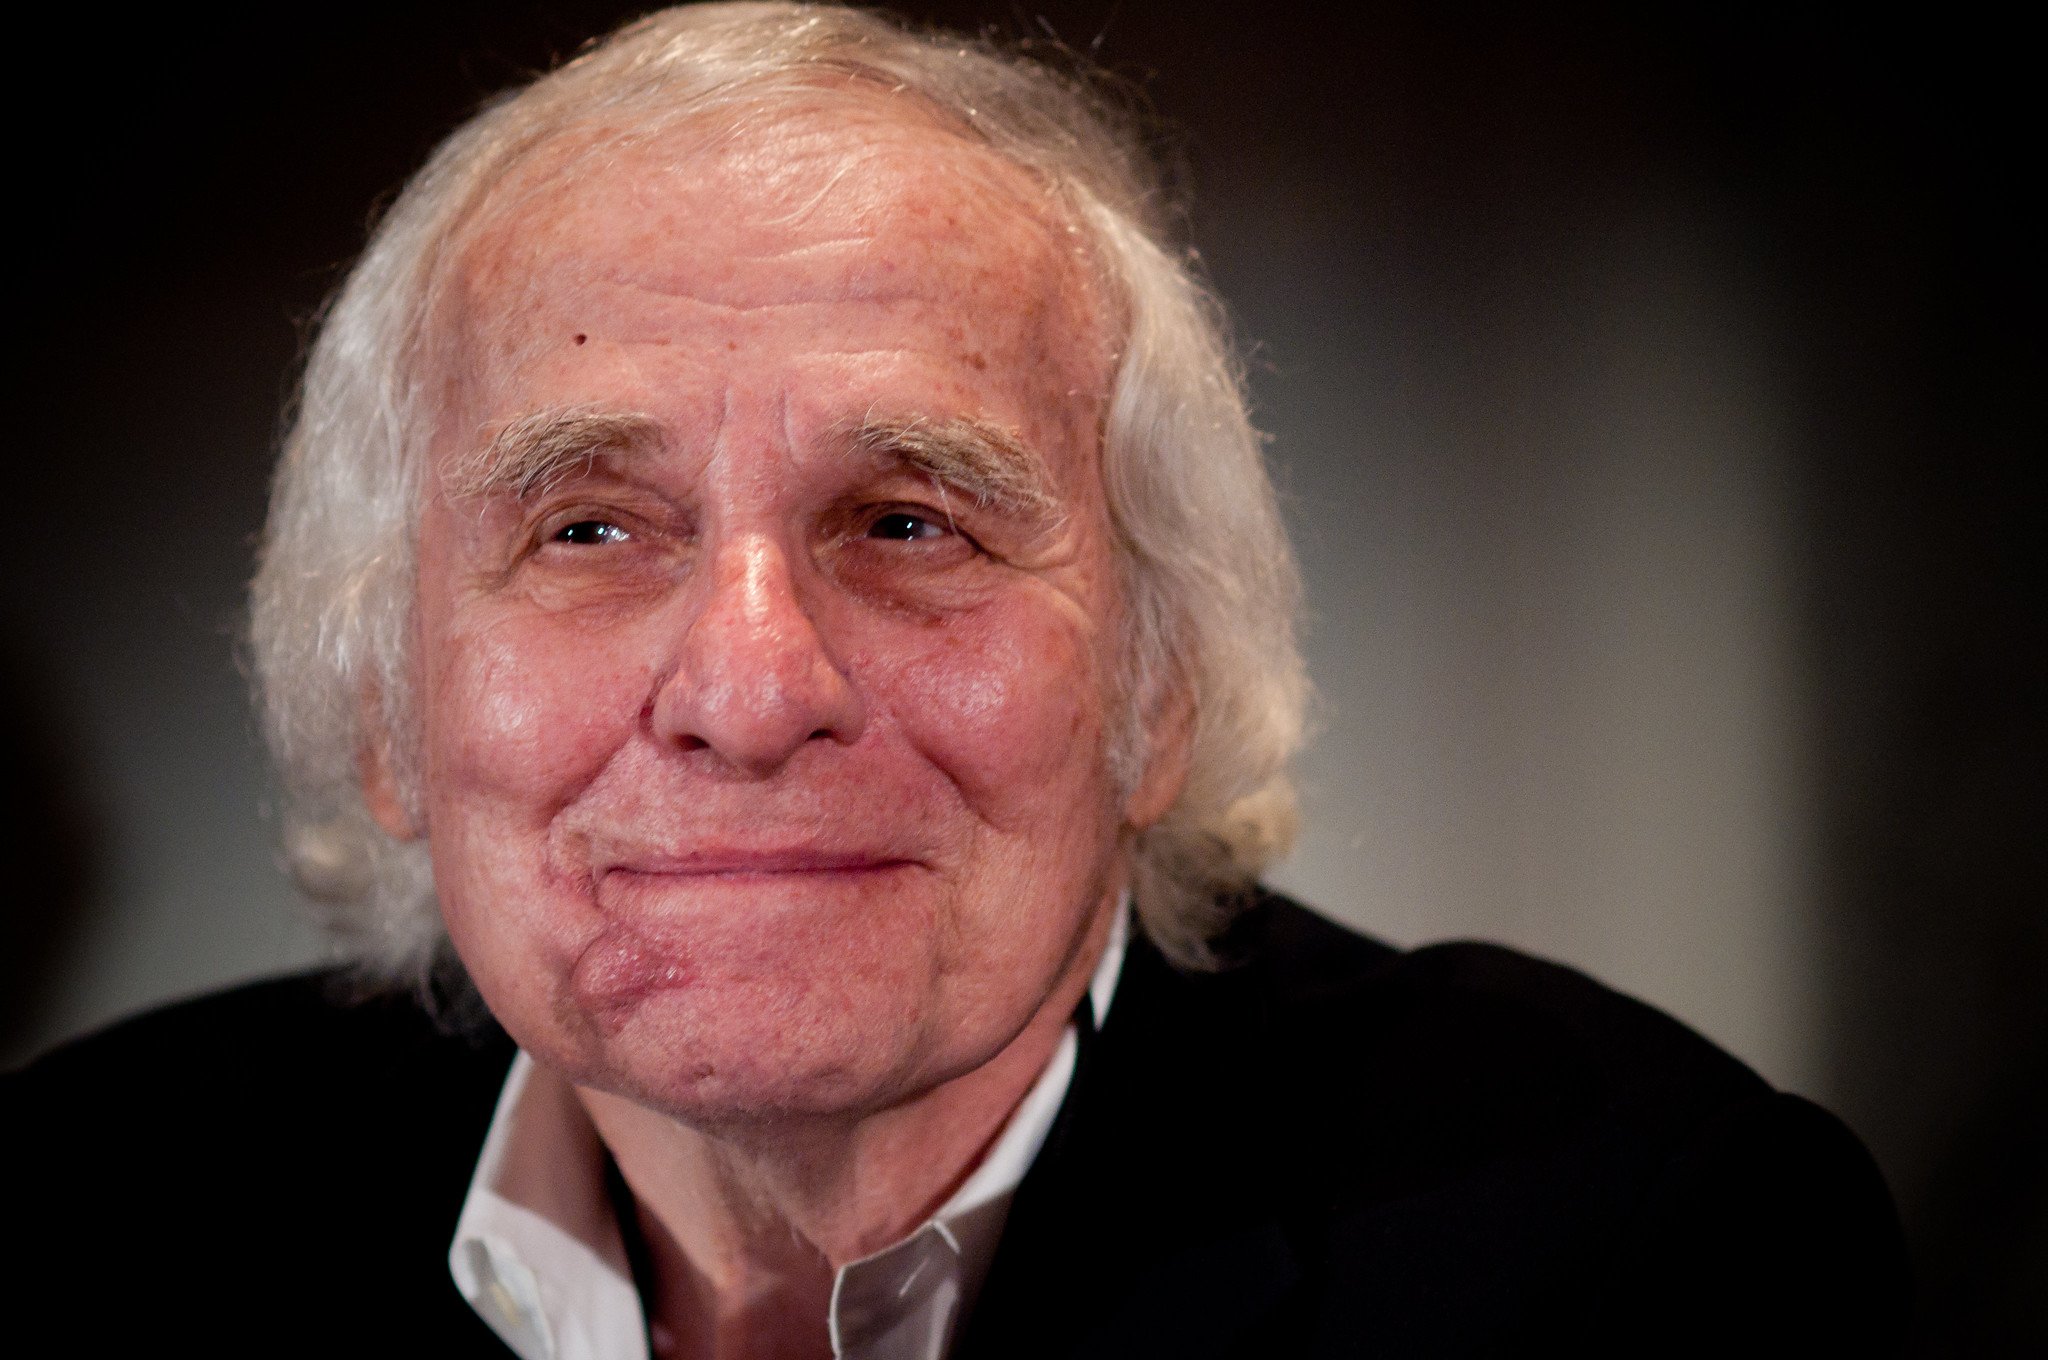 Mort Drucker at the New York Comic Con-9 on October 8, 2010 | Photo: Flickr/Marnie Joyce